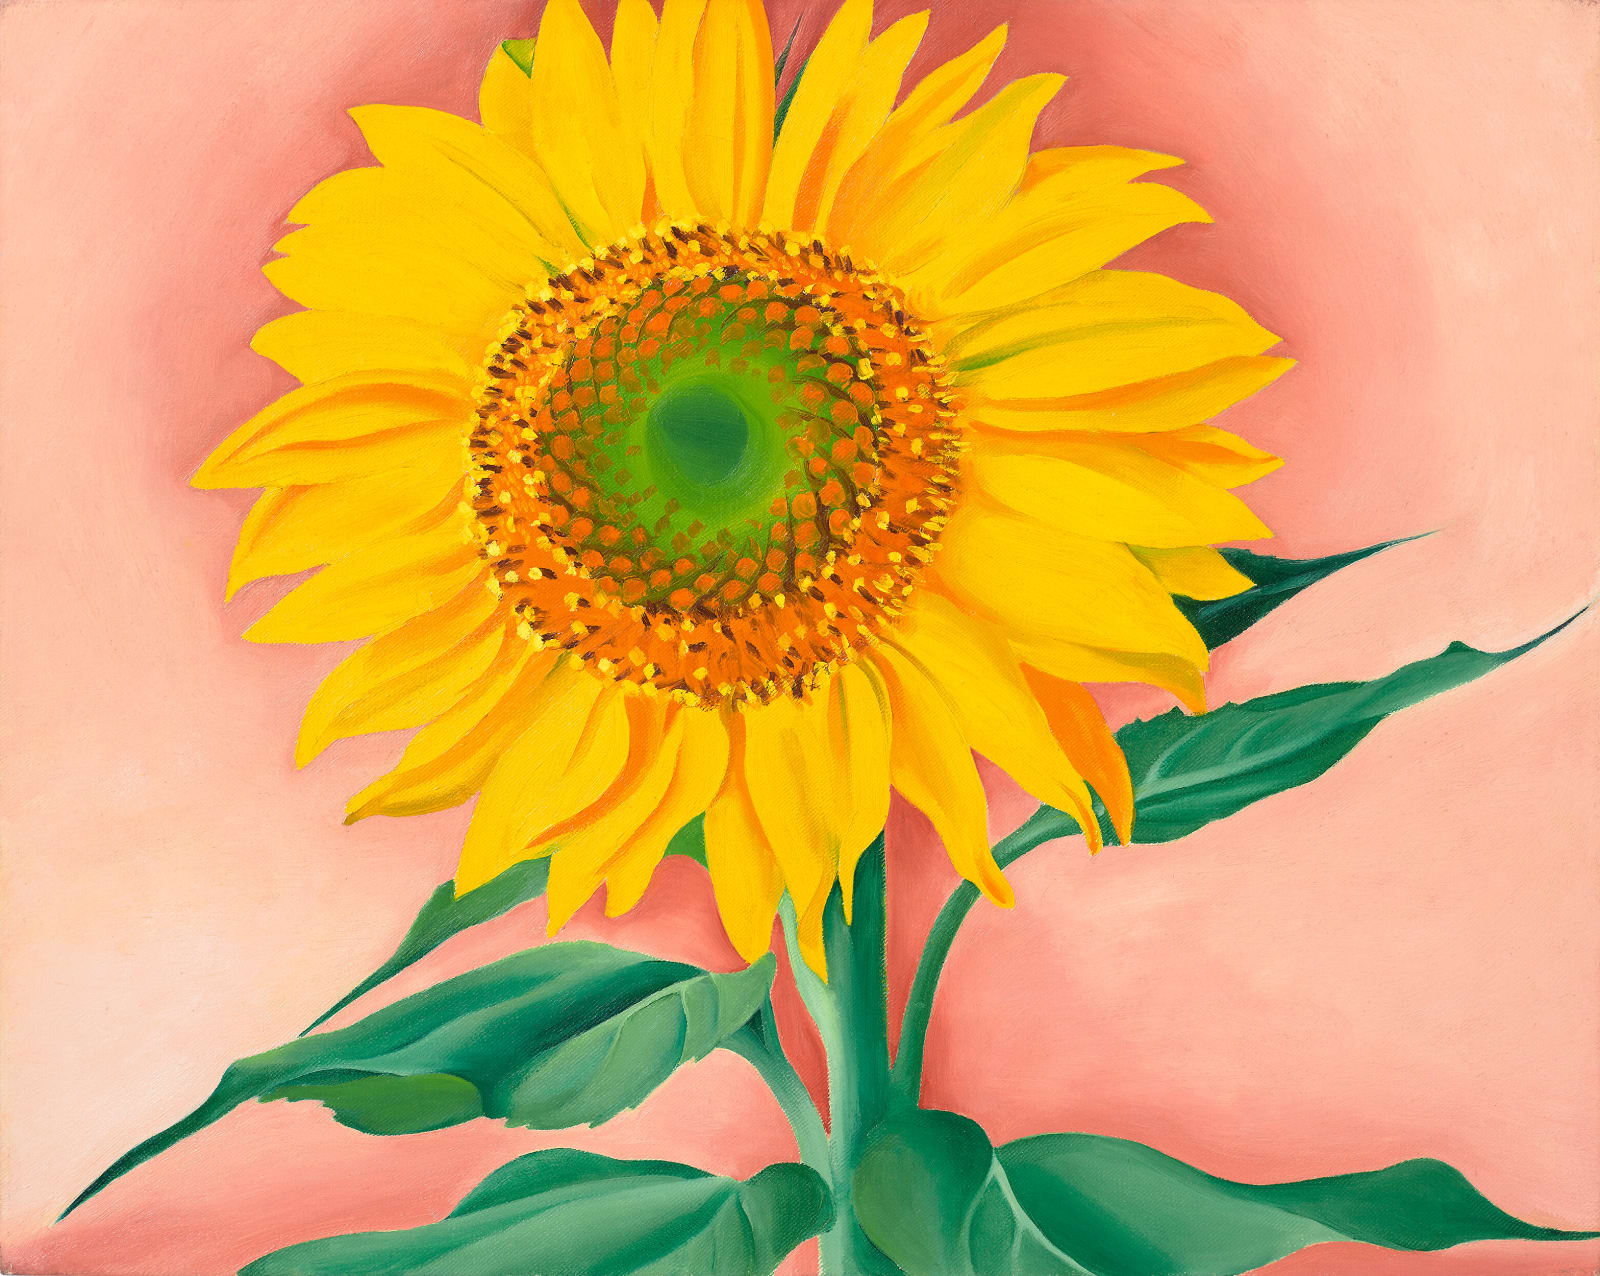 Georgia O'Keeffe, A Sunflower from Maggie, 1937